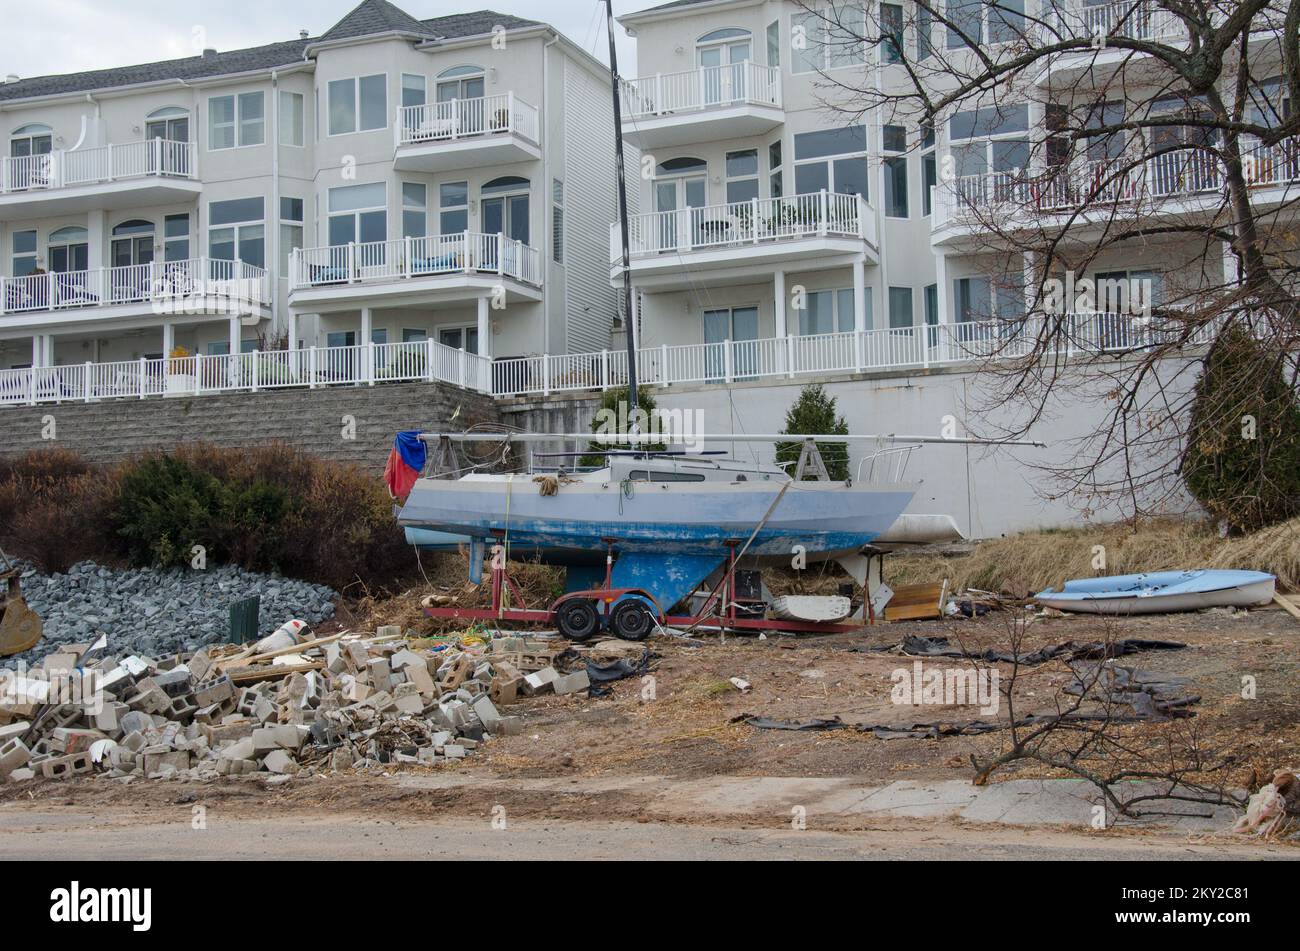 Hurricane Sandy Damage in Perth Amboy. New Jersey Hurricane Sandy. Photographs Relating to Disasters and Emergency Management Programs, Activities, and Officials Stock Photo